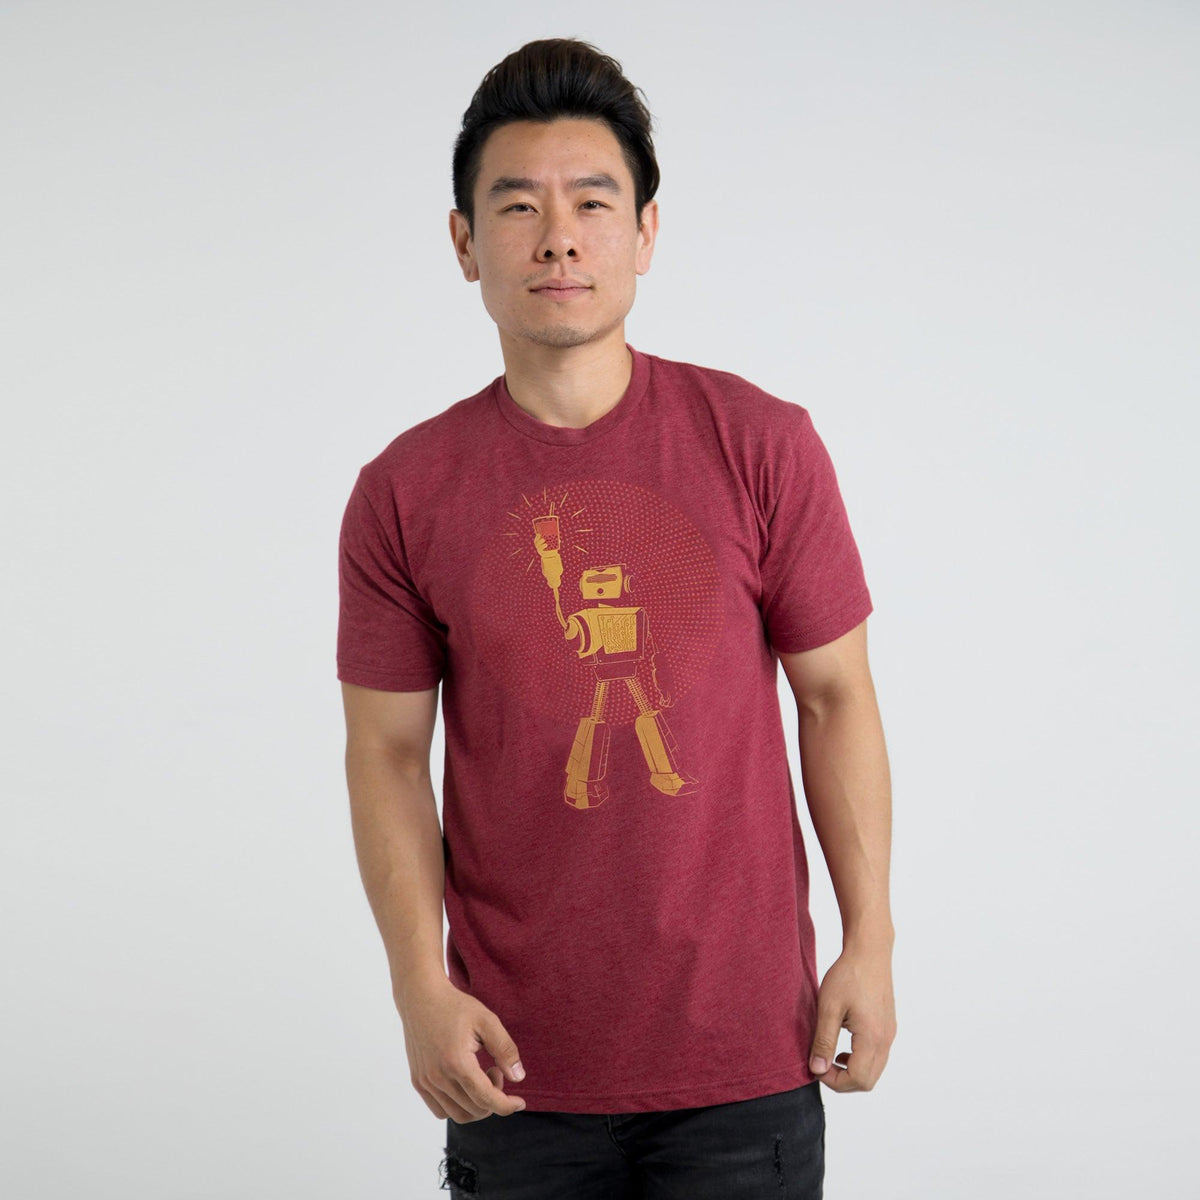 Boba Power T-shirt by STORY SPARK